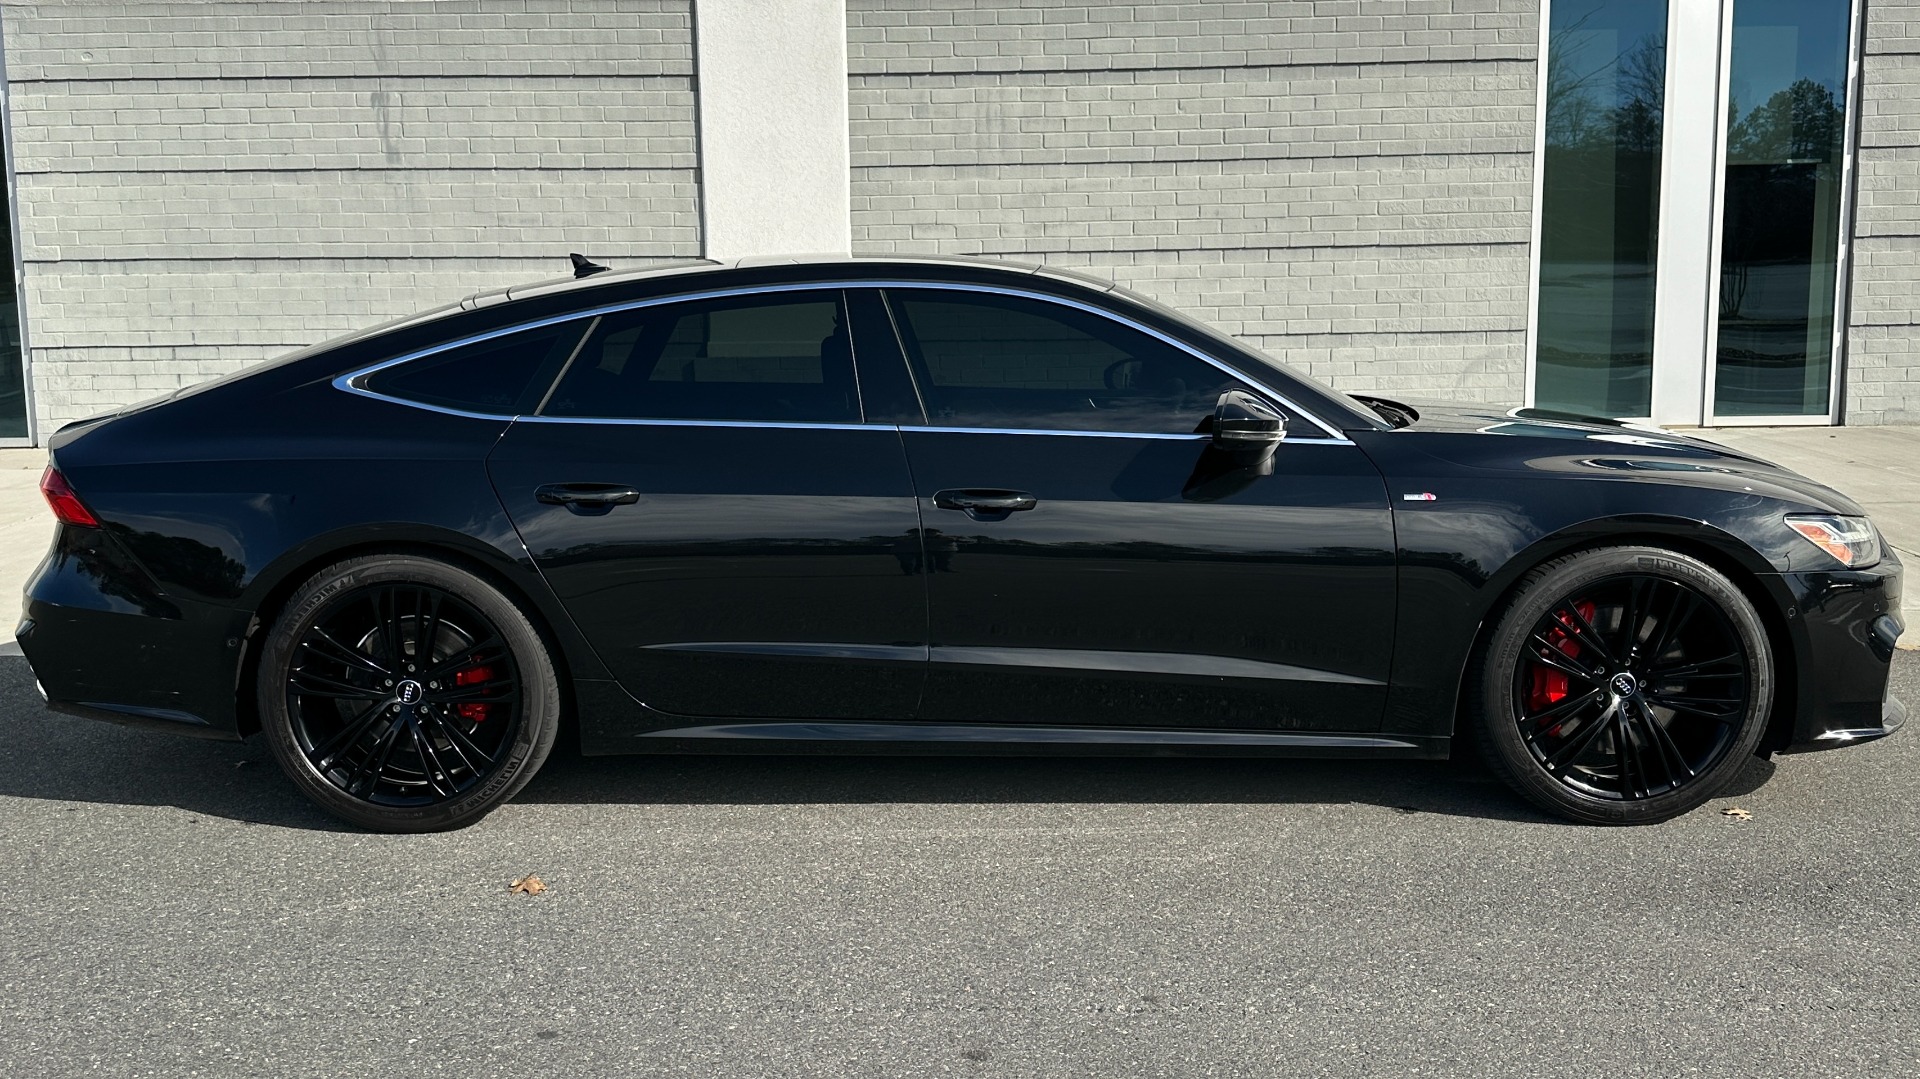 Used 2019 Audi A7 PREMIUM PLUS / S-LINE / 20IN GLOSS BLACK WHEELS / COLD WEATHER PKG / RED CA for sale $53,995 at Formula Imports in Charlotte NC 28227 6